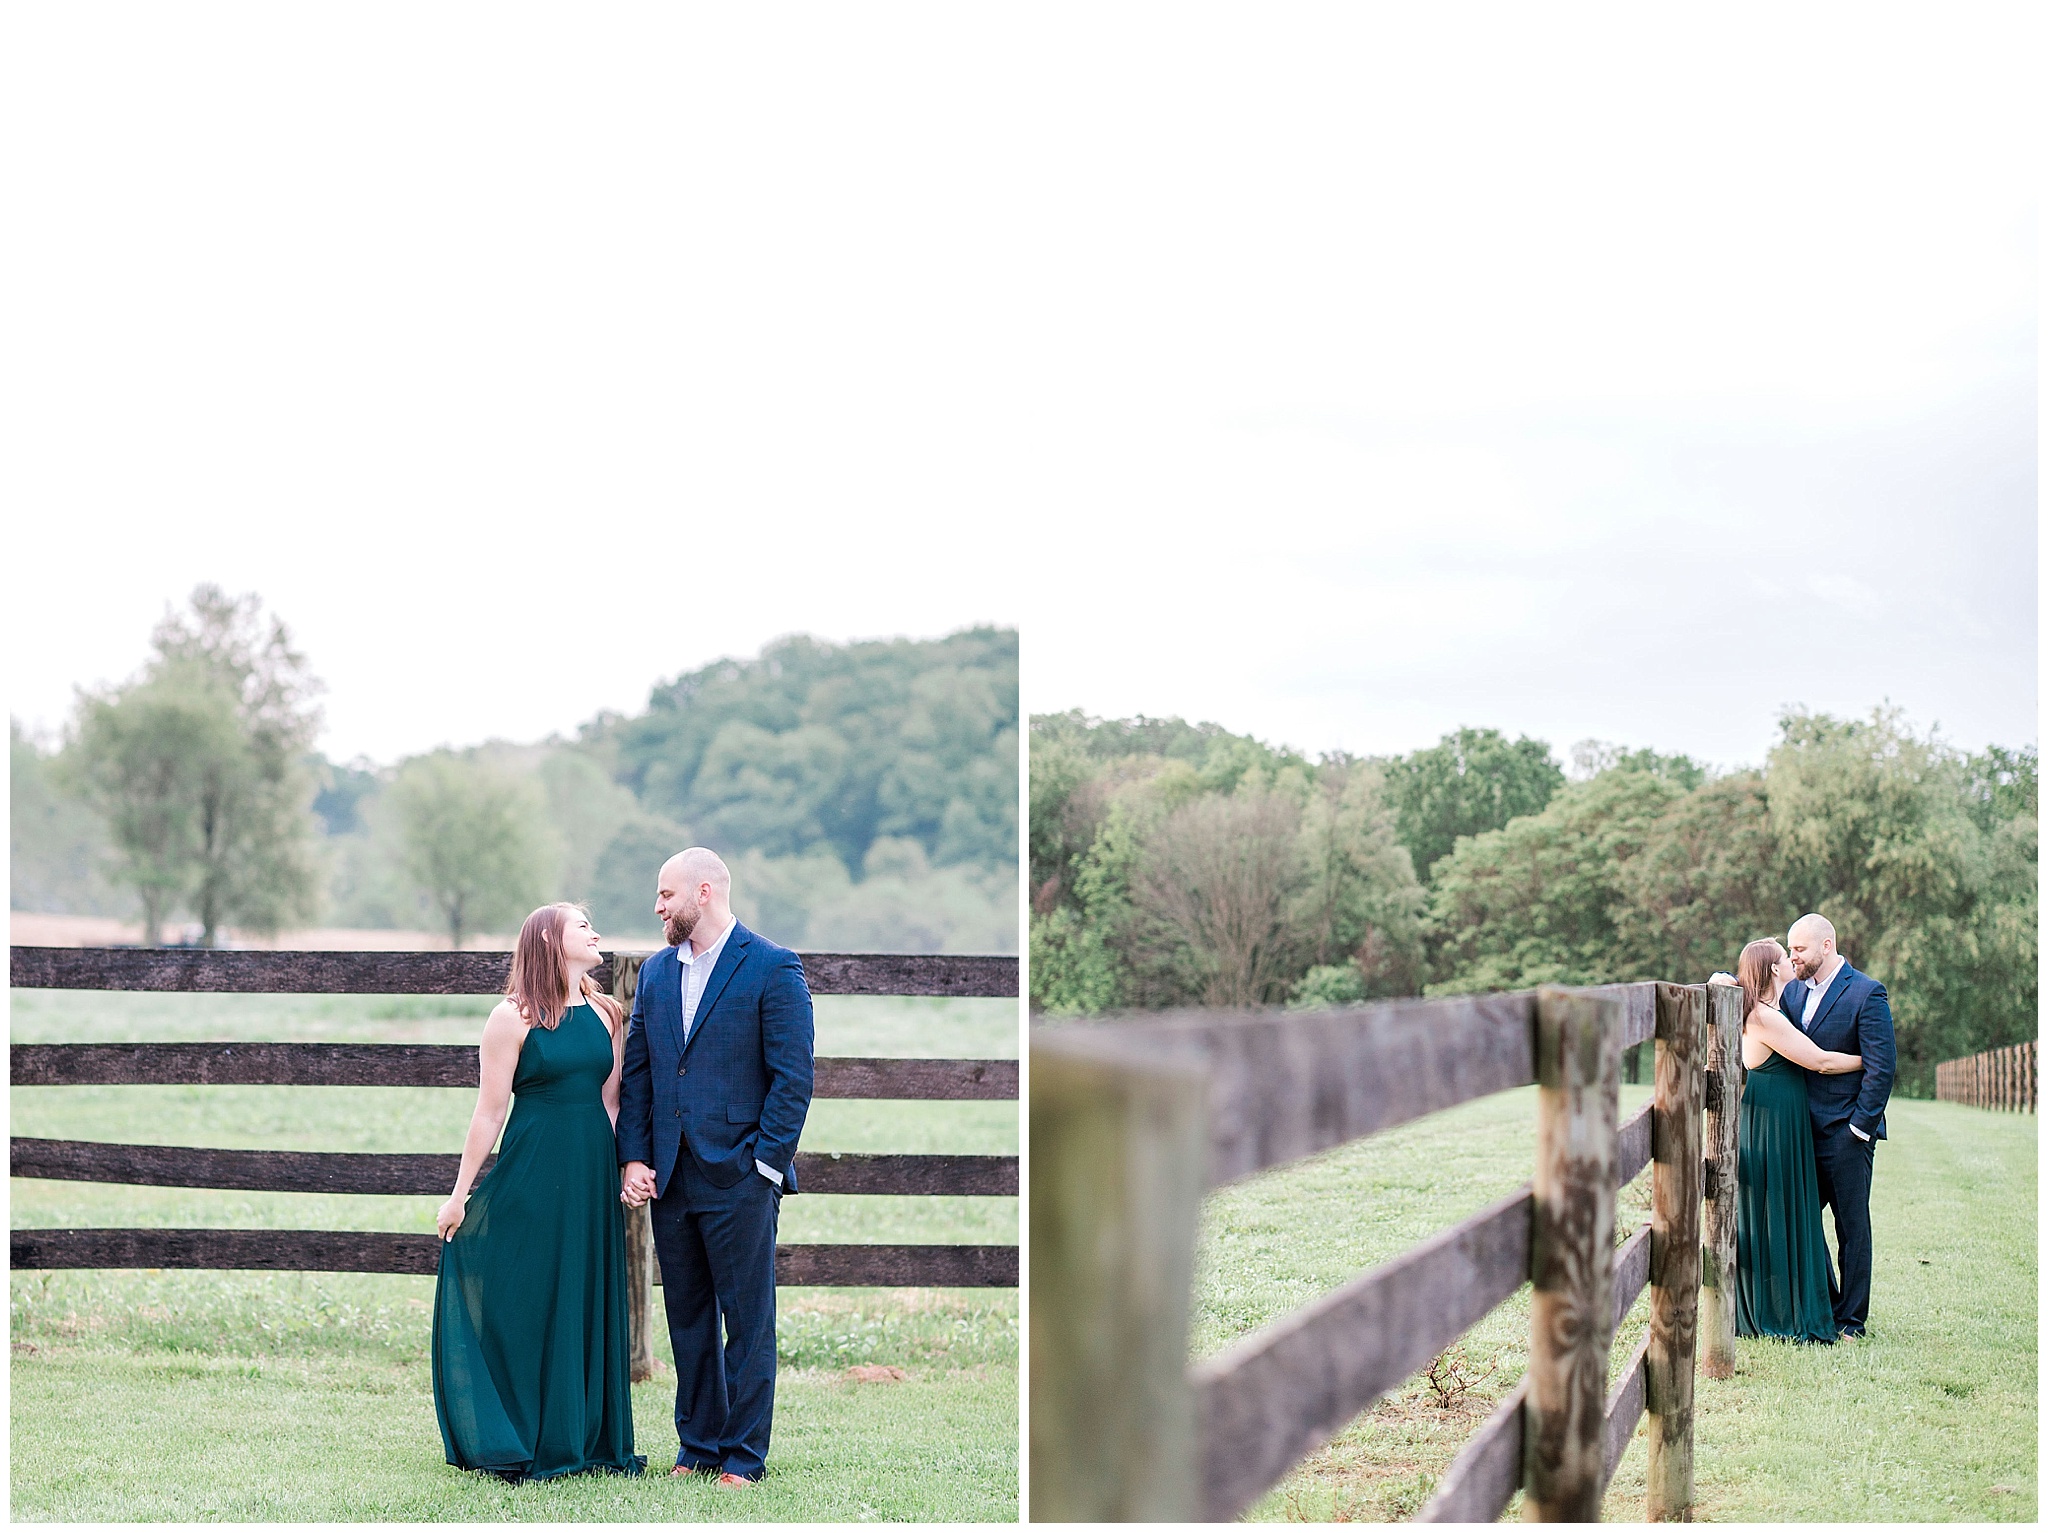 engagement photo at sylvandside farm in loudon county virginia, sylvanside farm, slyvanside farm wedding, slyvanside farm engagement, northern virginia wedding photographer, dc wedding photographer